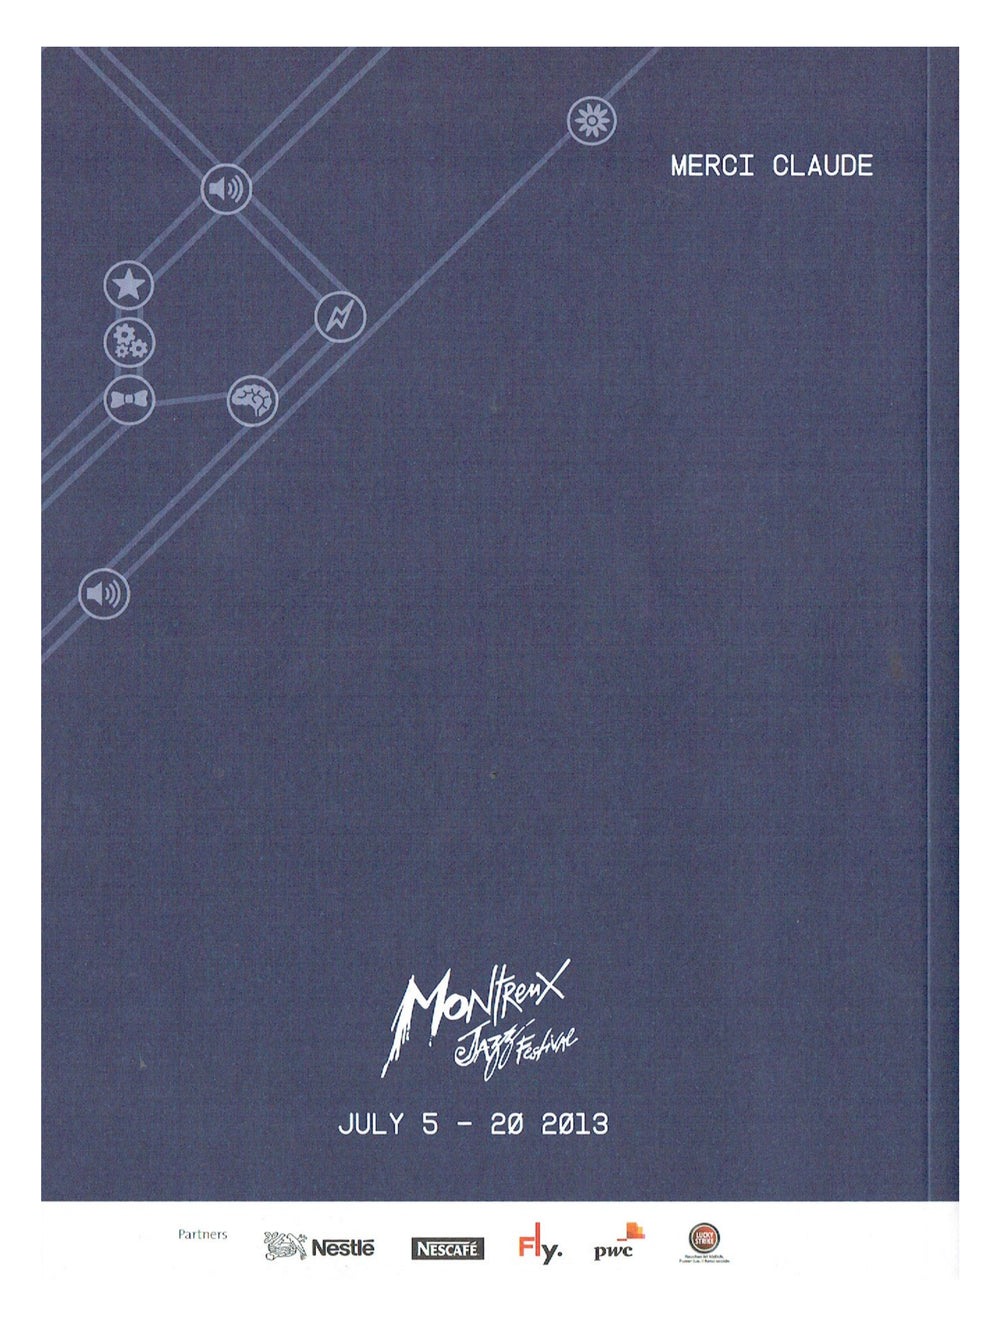 Prince – Montreux Jazz Festival  July 5th - 20th 2013 Official Tour Book